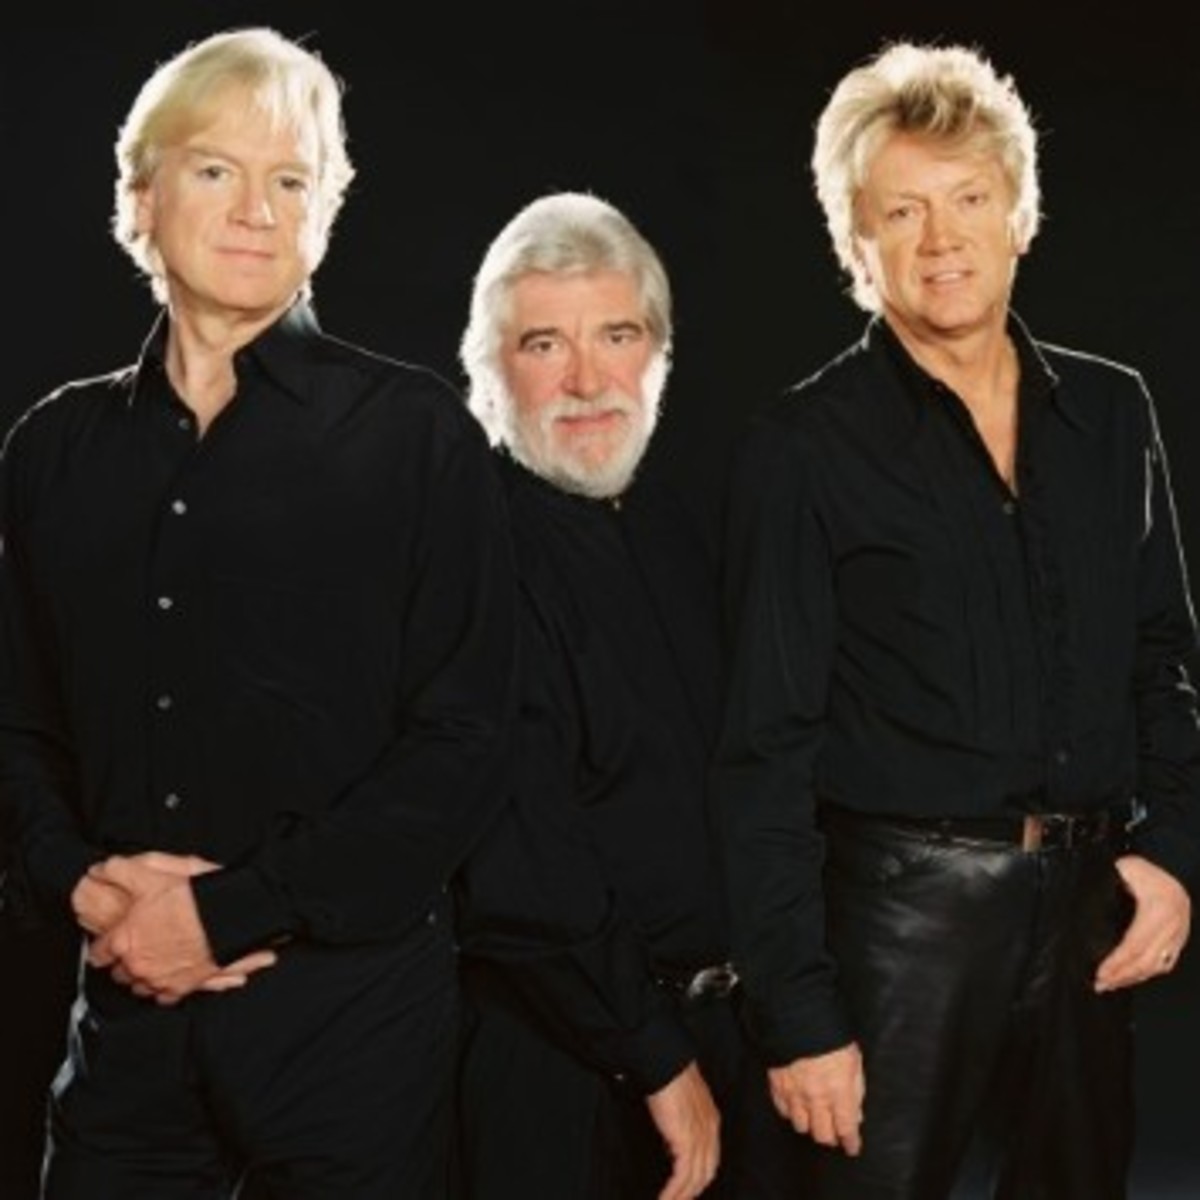 The core trio of The Moody Blues (from left) Justin Hayward, Graeme Edge and bassist John Lodge. All three were in the band when it played the legendary Isle of Wight gig in 1970. Photo: Nancy Rosen.